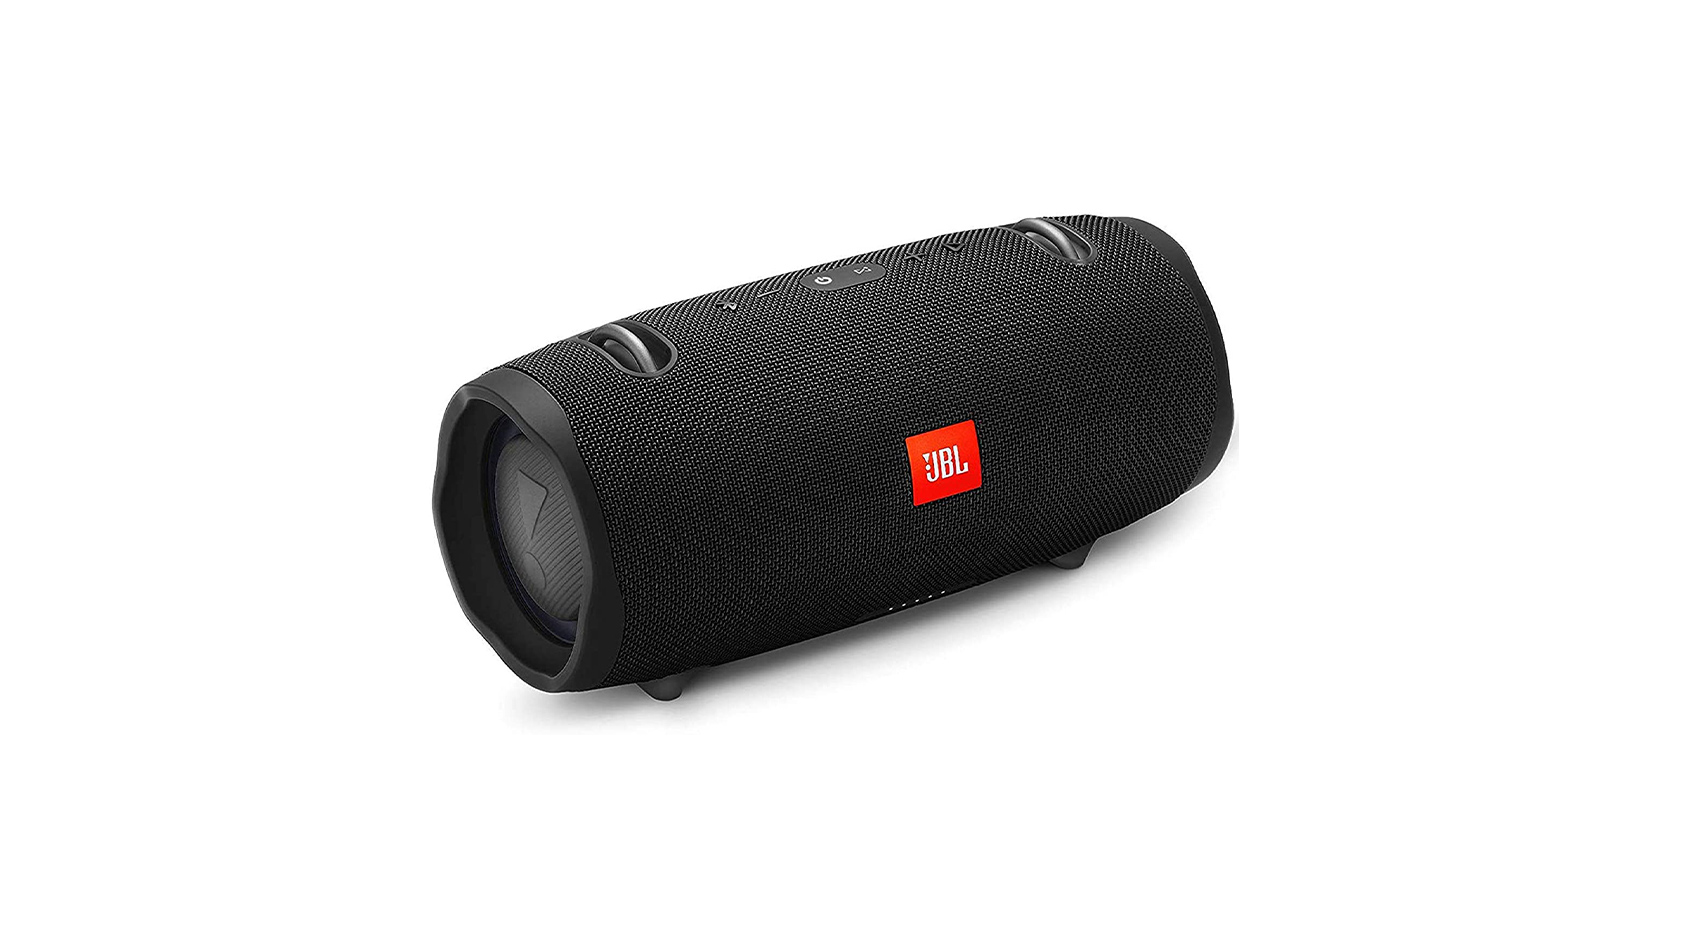 The JBL Xtreme 2 portable Bluetooth speaker in black against a white background.